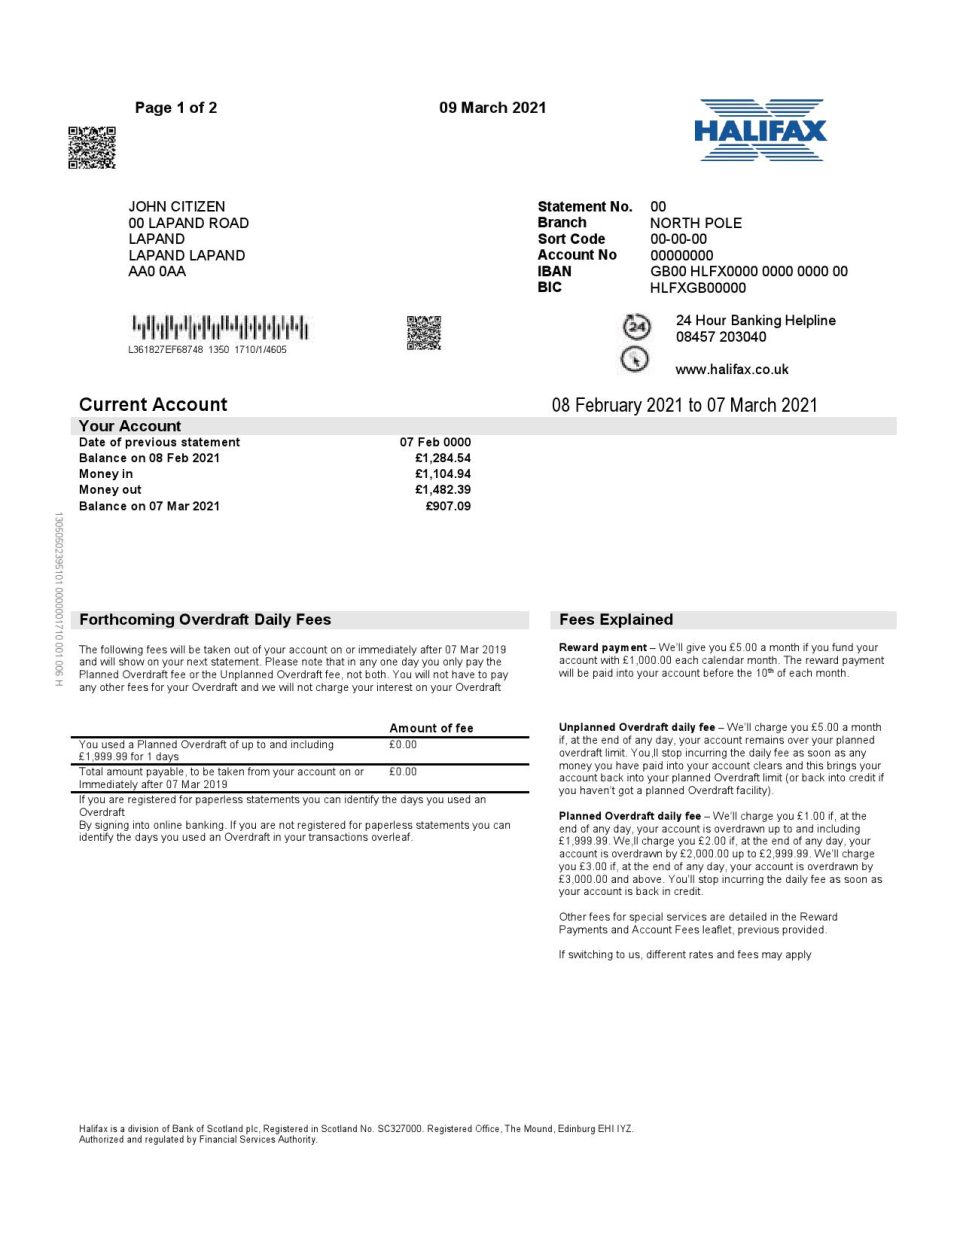 United Kingdom Halifax bank proof of address statement template in Word and PDF format (2 pages)